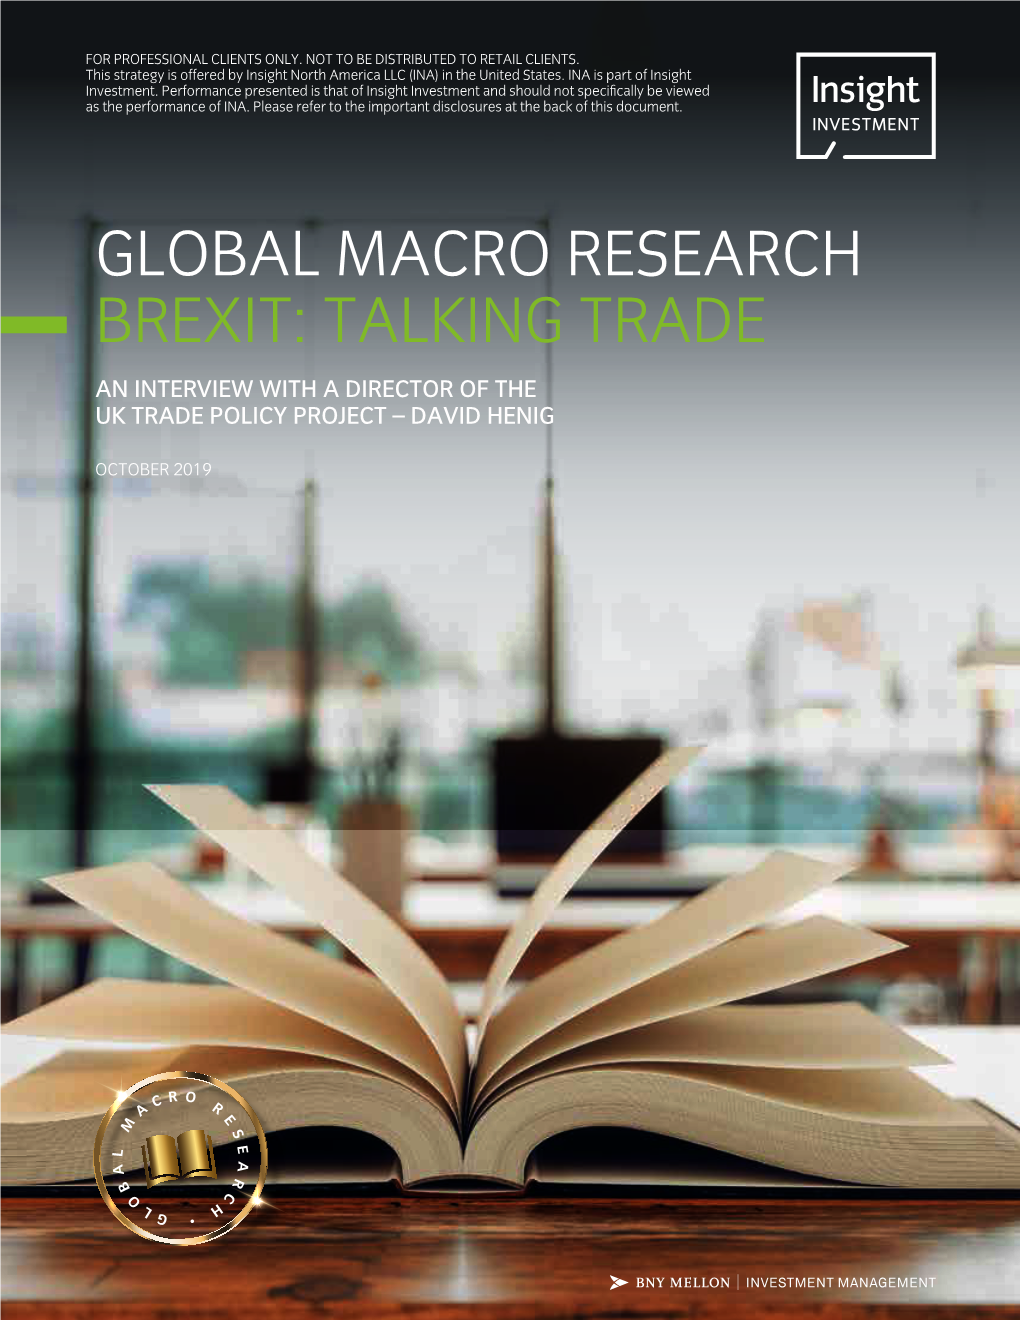 Global Macro Research Brexit: Talking Trade an Interview with a Director of the Uk Trade Policy Project – David Henig